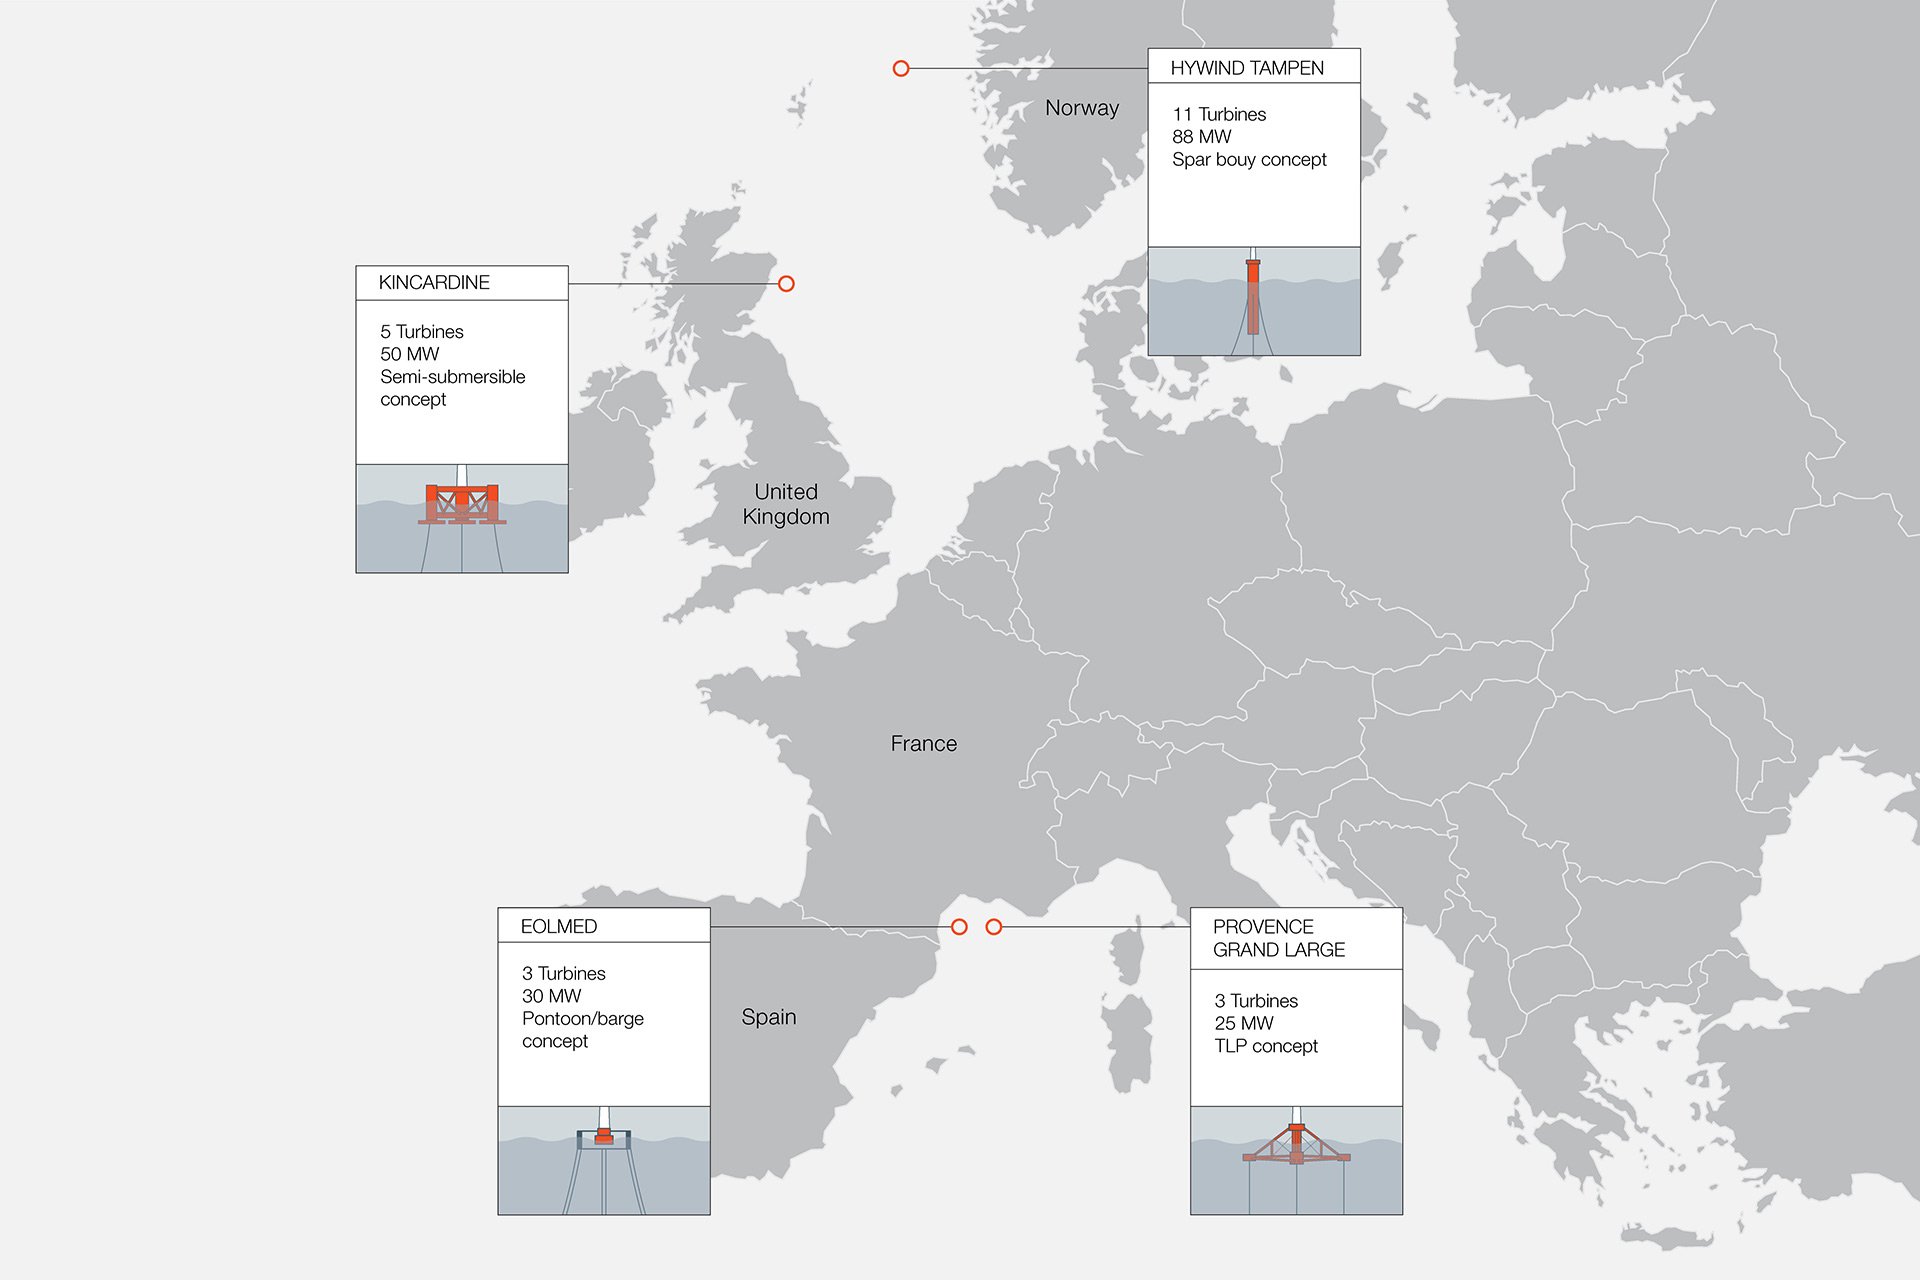 Floating offshore wind typologies represented in Europe's map